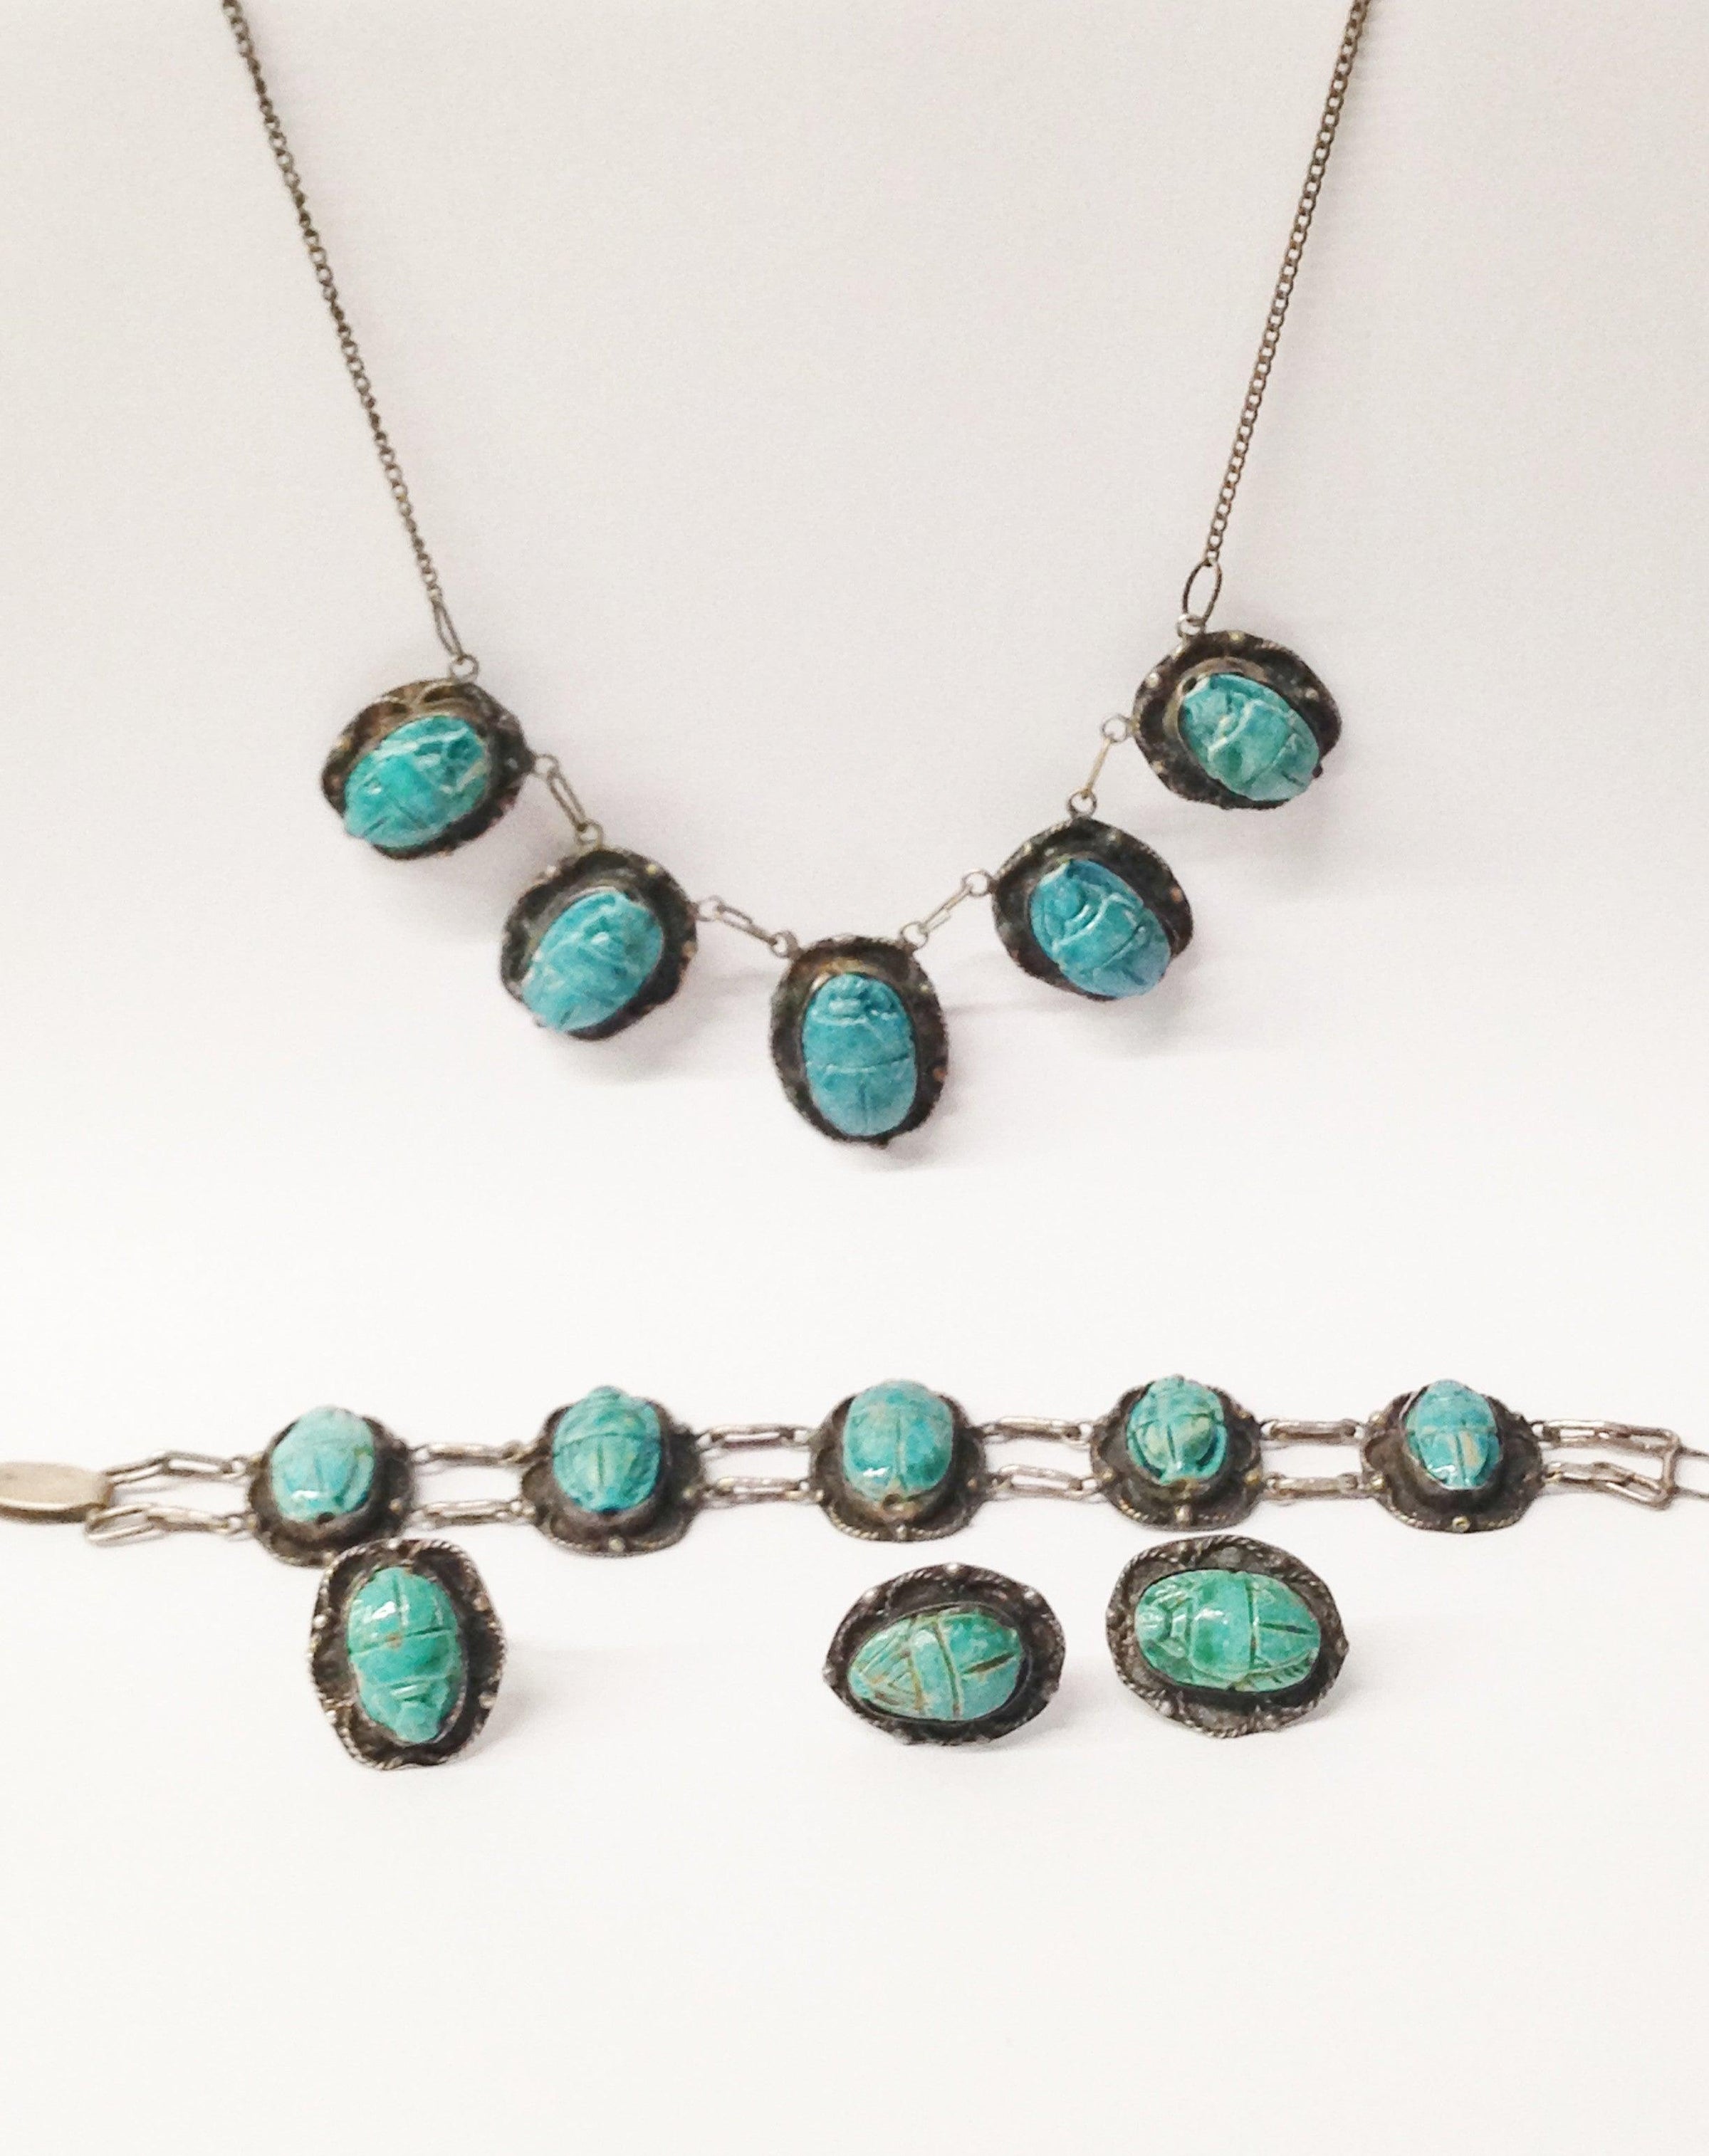 Vintage 1940's Egyptian Faience Blue Scarab 600 Silver Necklace, Bracelet, Earrings and Ring Set - Hers and His Treasures